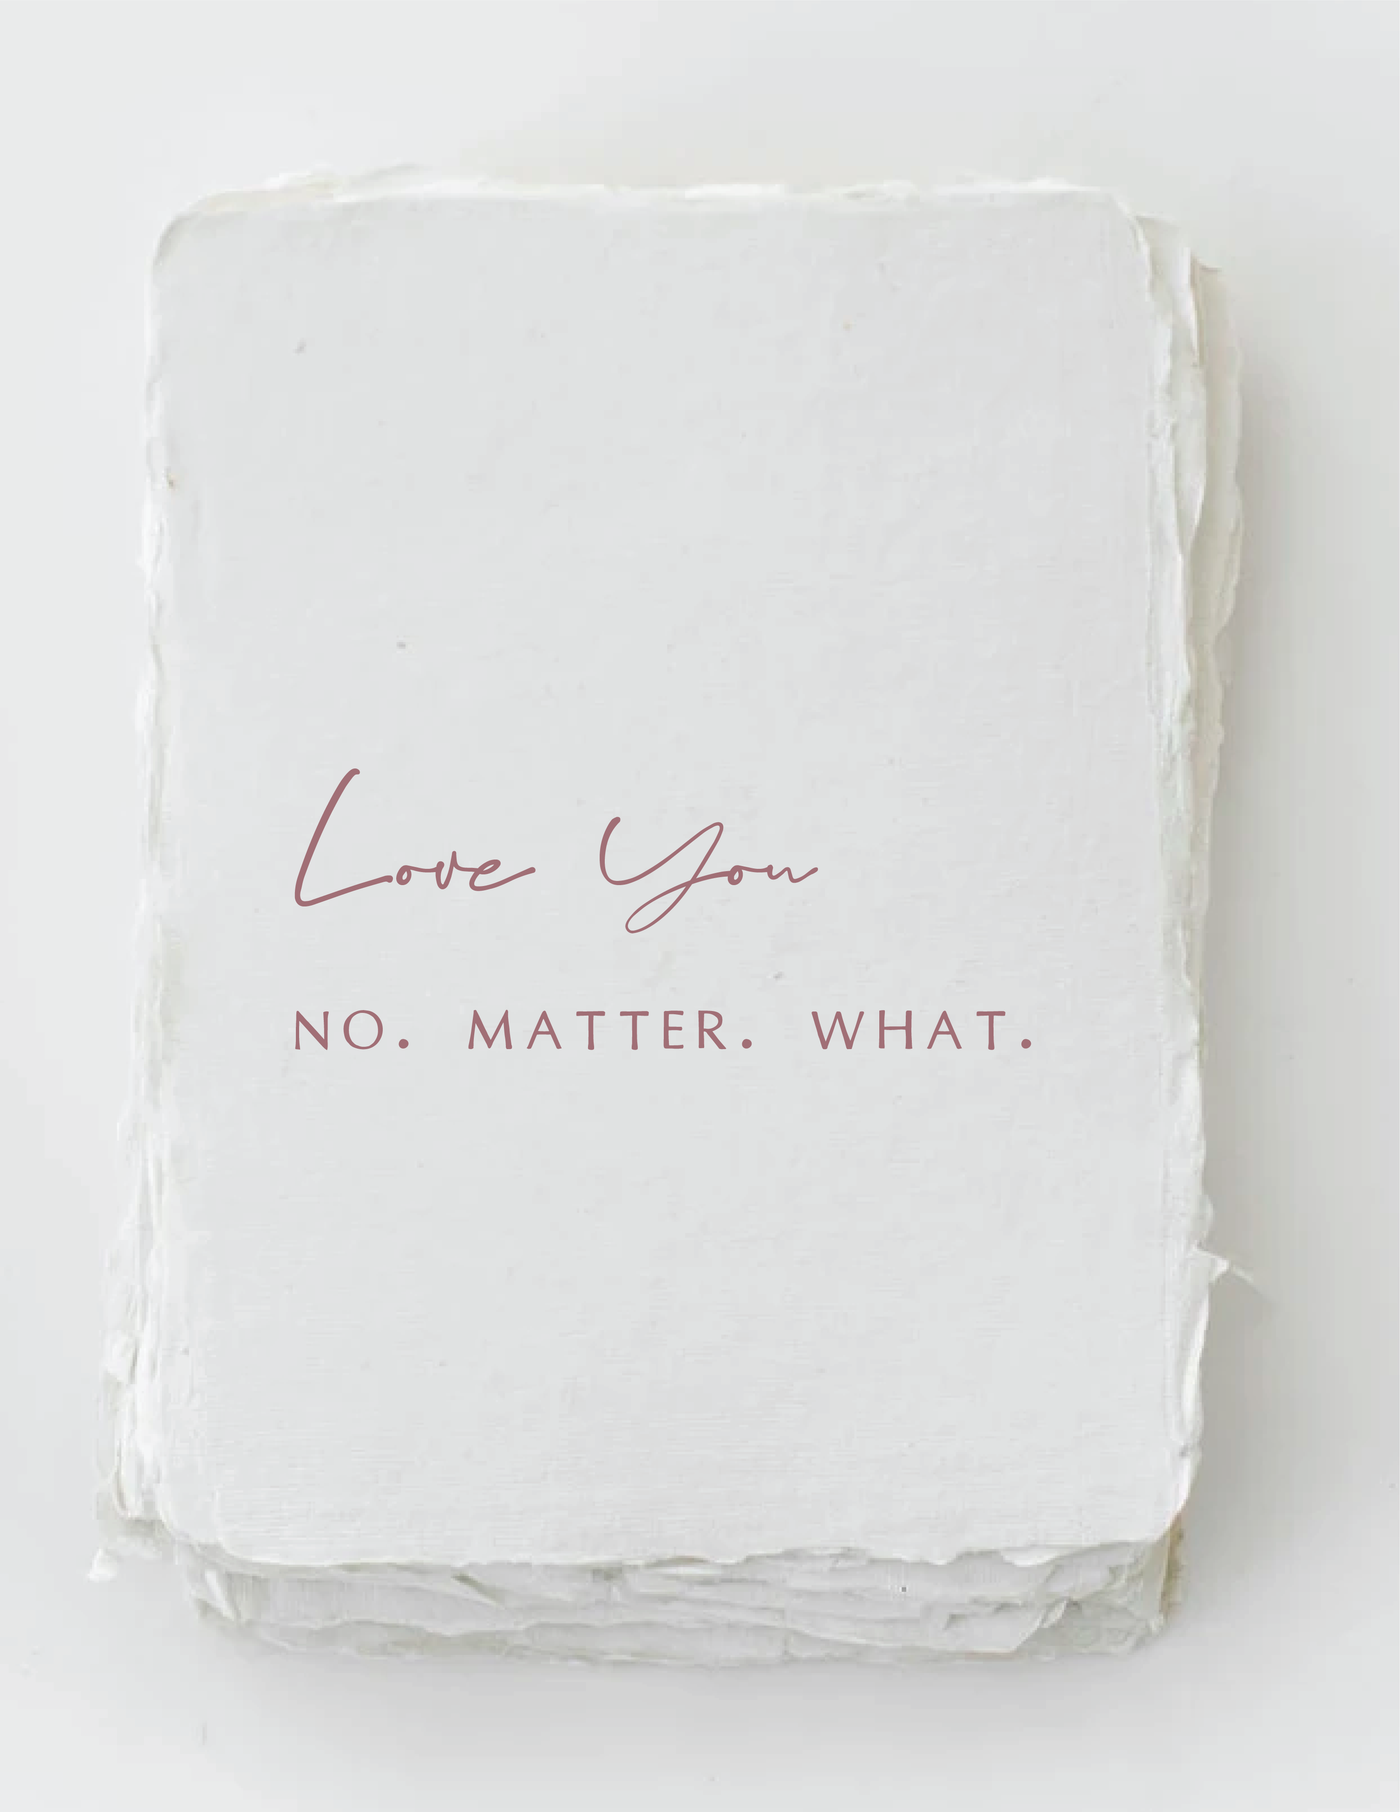 Paper Baristas - "Love you. No. Matter. What." Love Friend Greeting Card